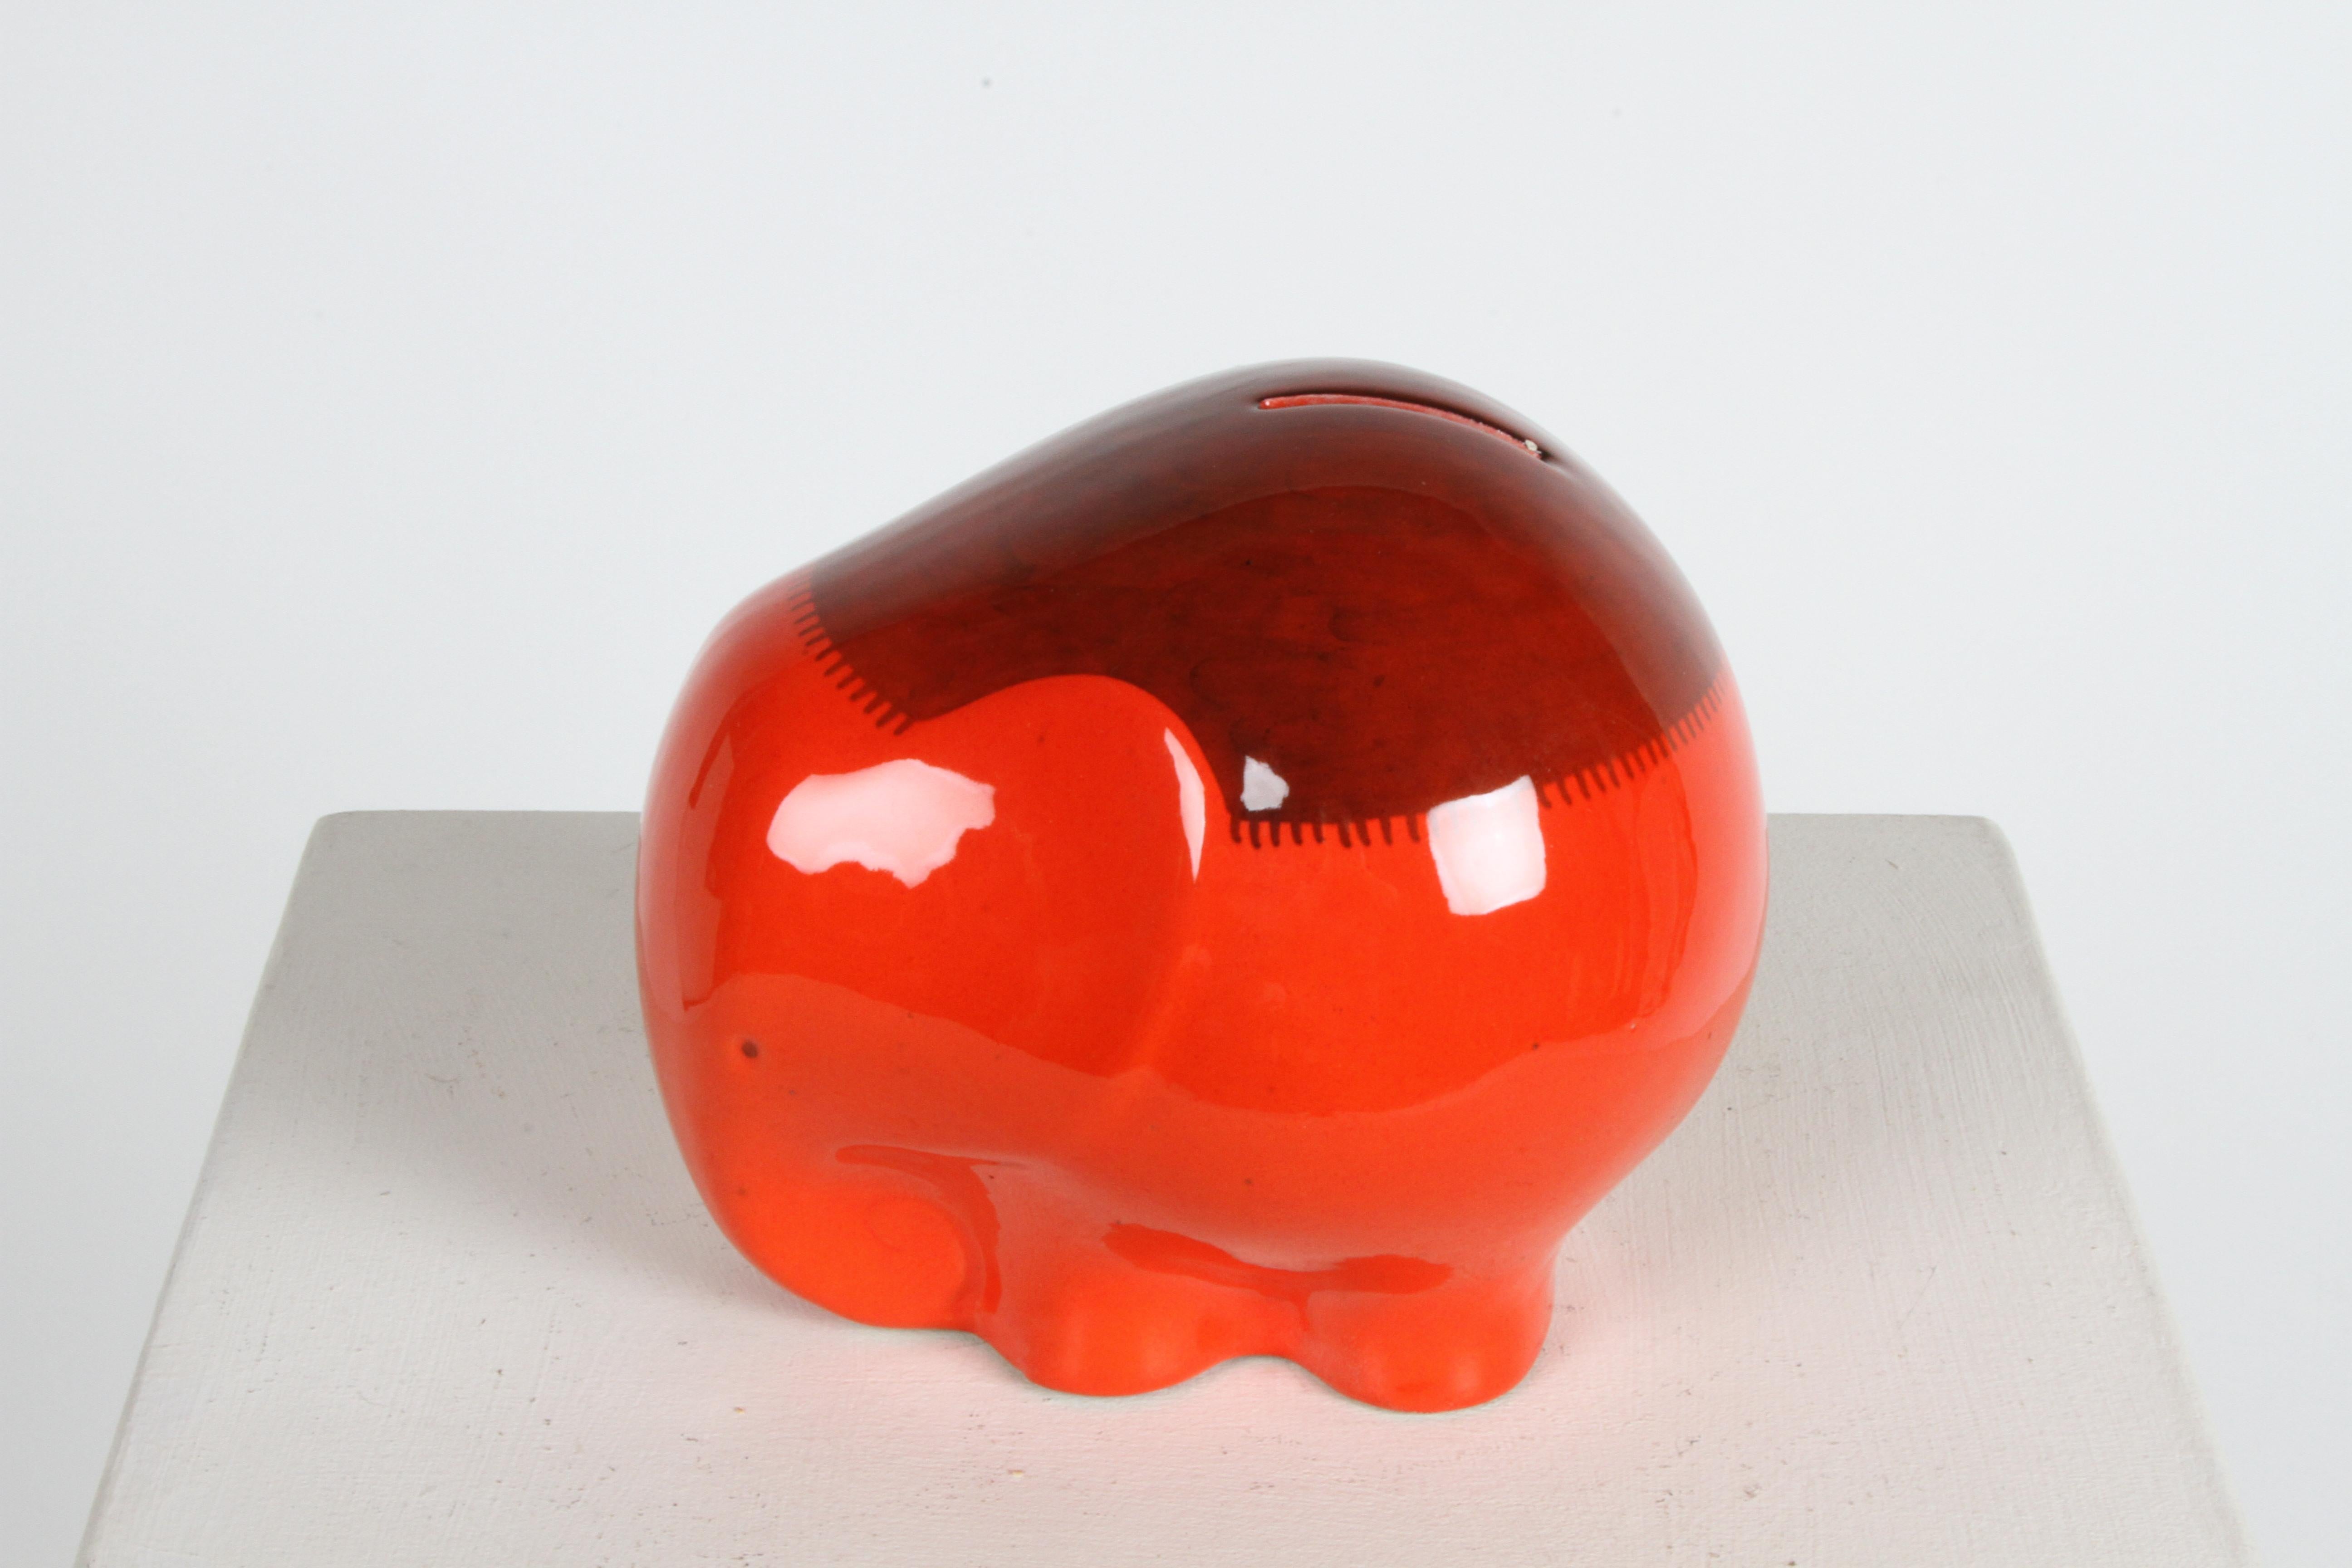 Whimsical mid-century elephant coin bank, money box or piggy bank from the Italian ceramics company Ceramiche Baldelli. Fired in a bright orange red glossy glaze, with hand painted fringe blanket on its back. Signed on bottom, Baldelli Italy 808. In